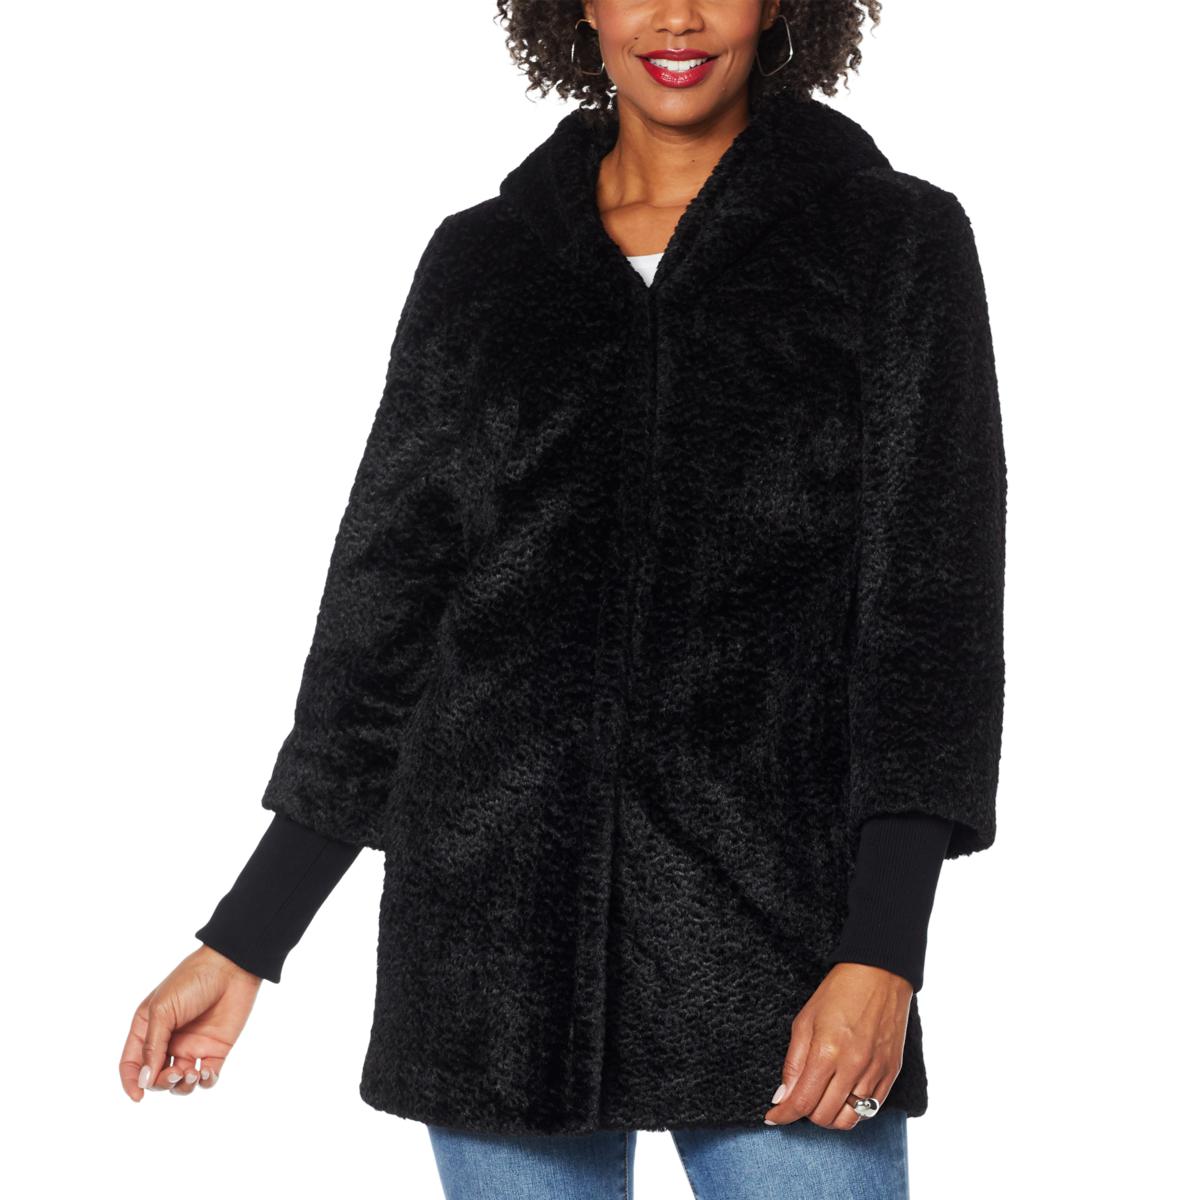 Laurier Hooded Faux Fur Coat with Storm Cuffs